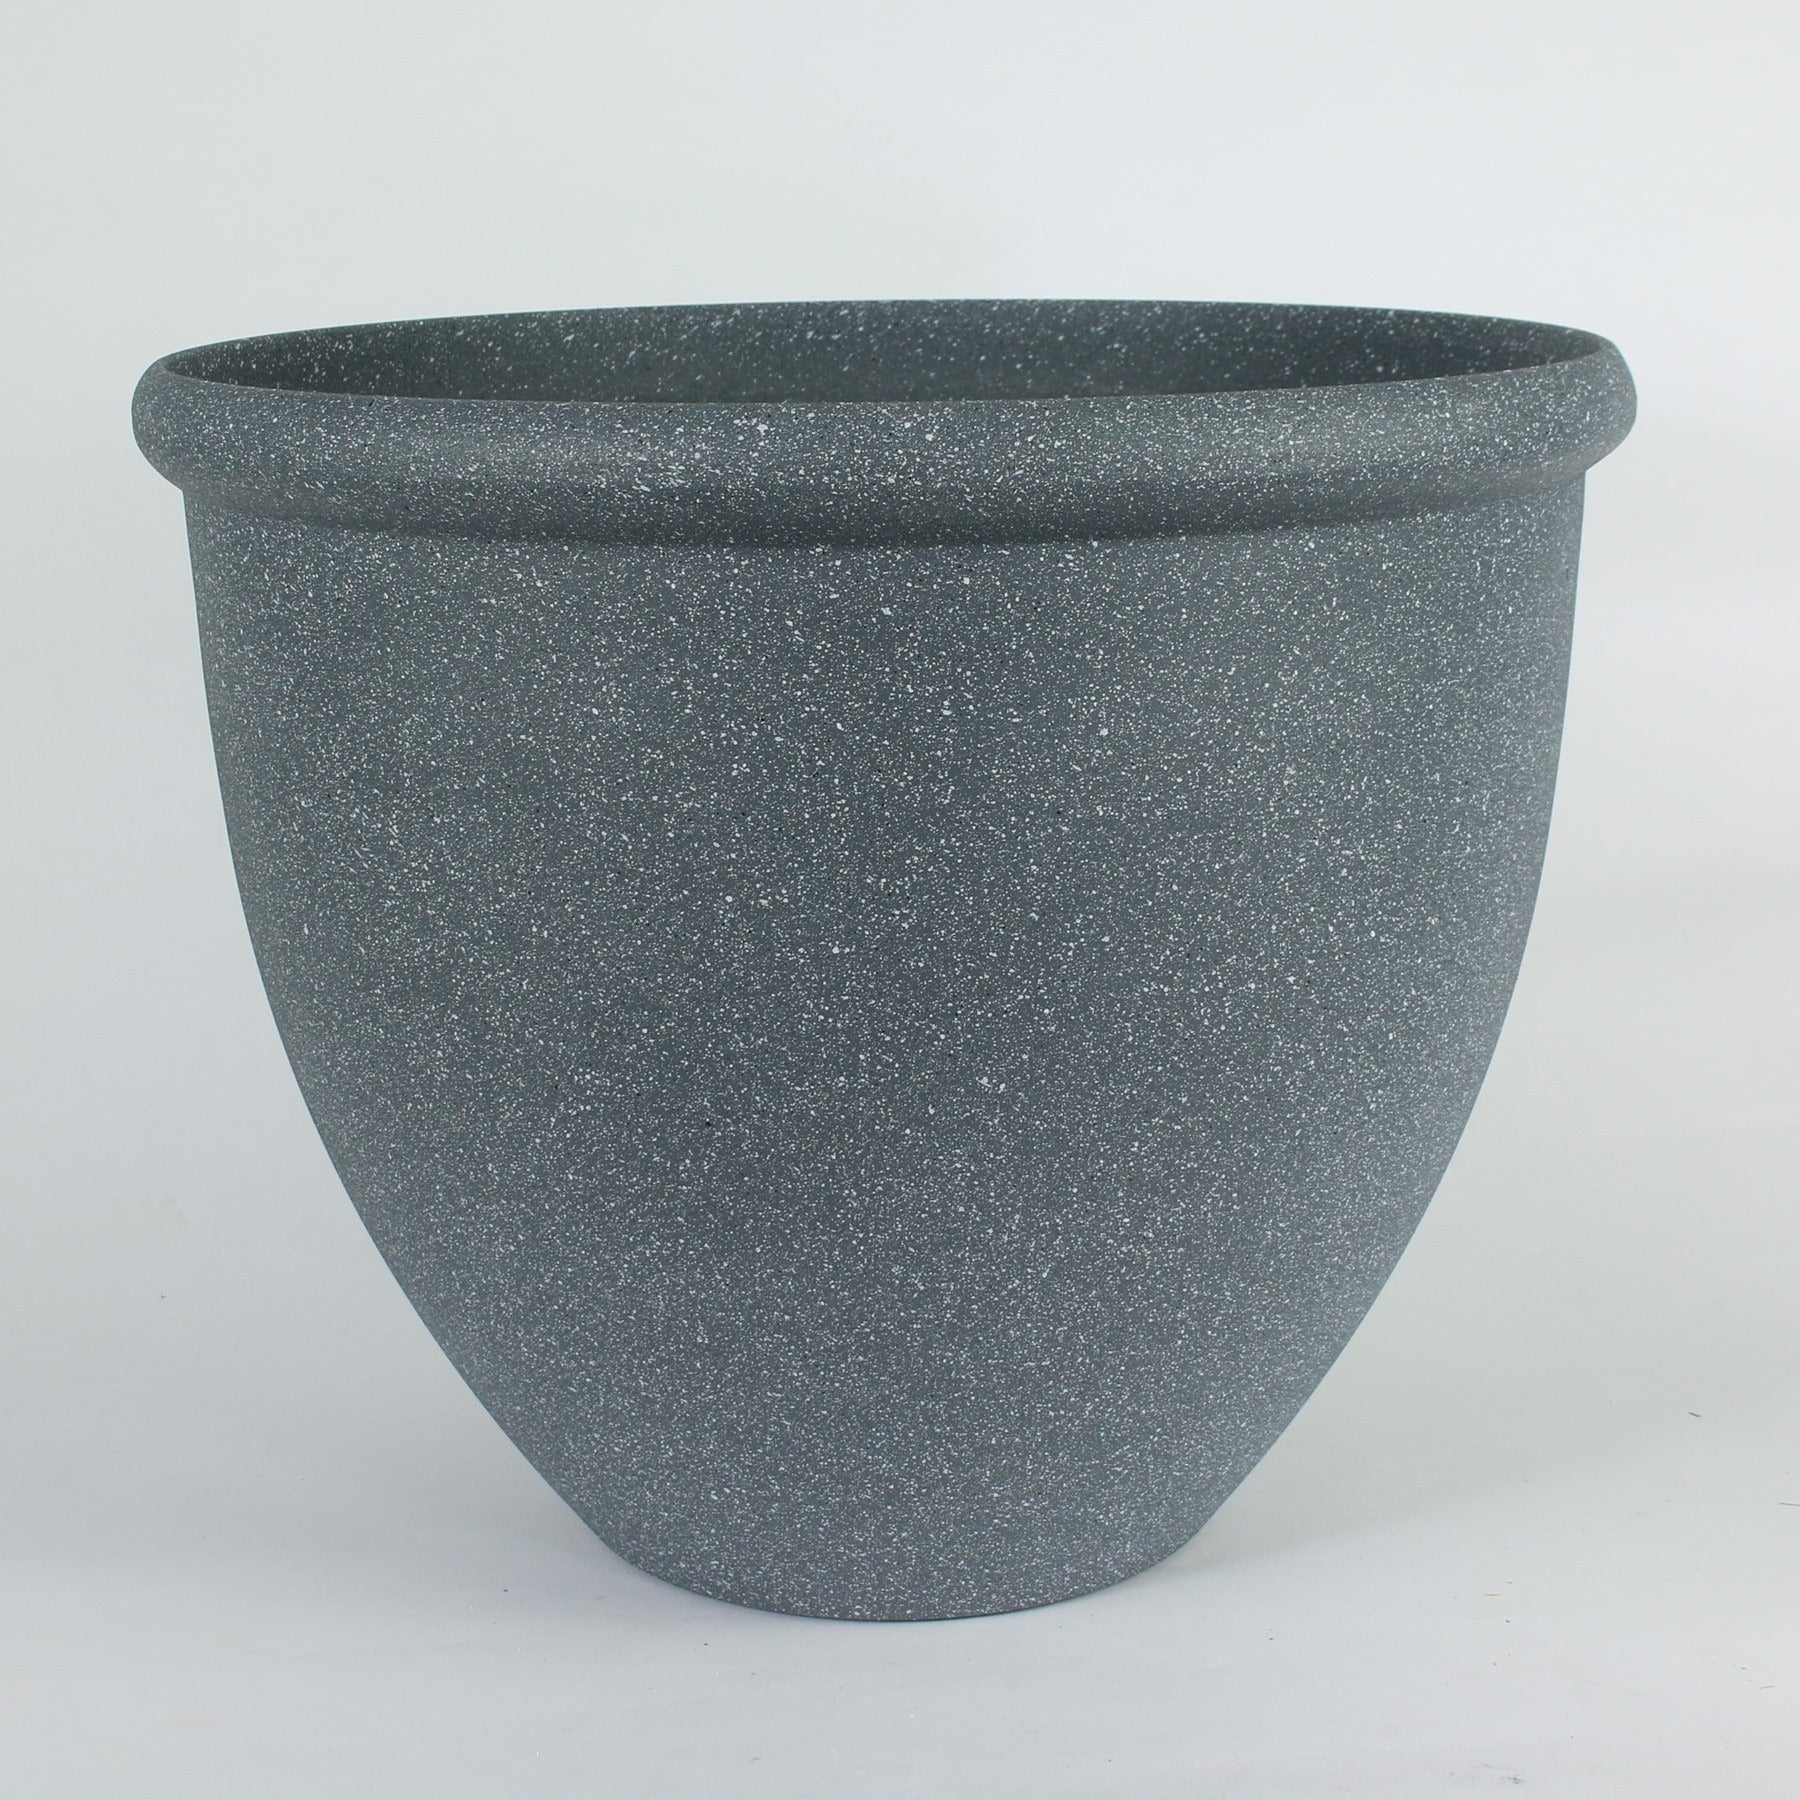 View 16 Inch Plastic Stone Effect Planter information